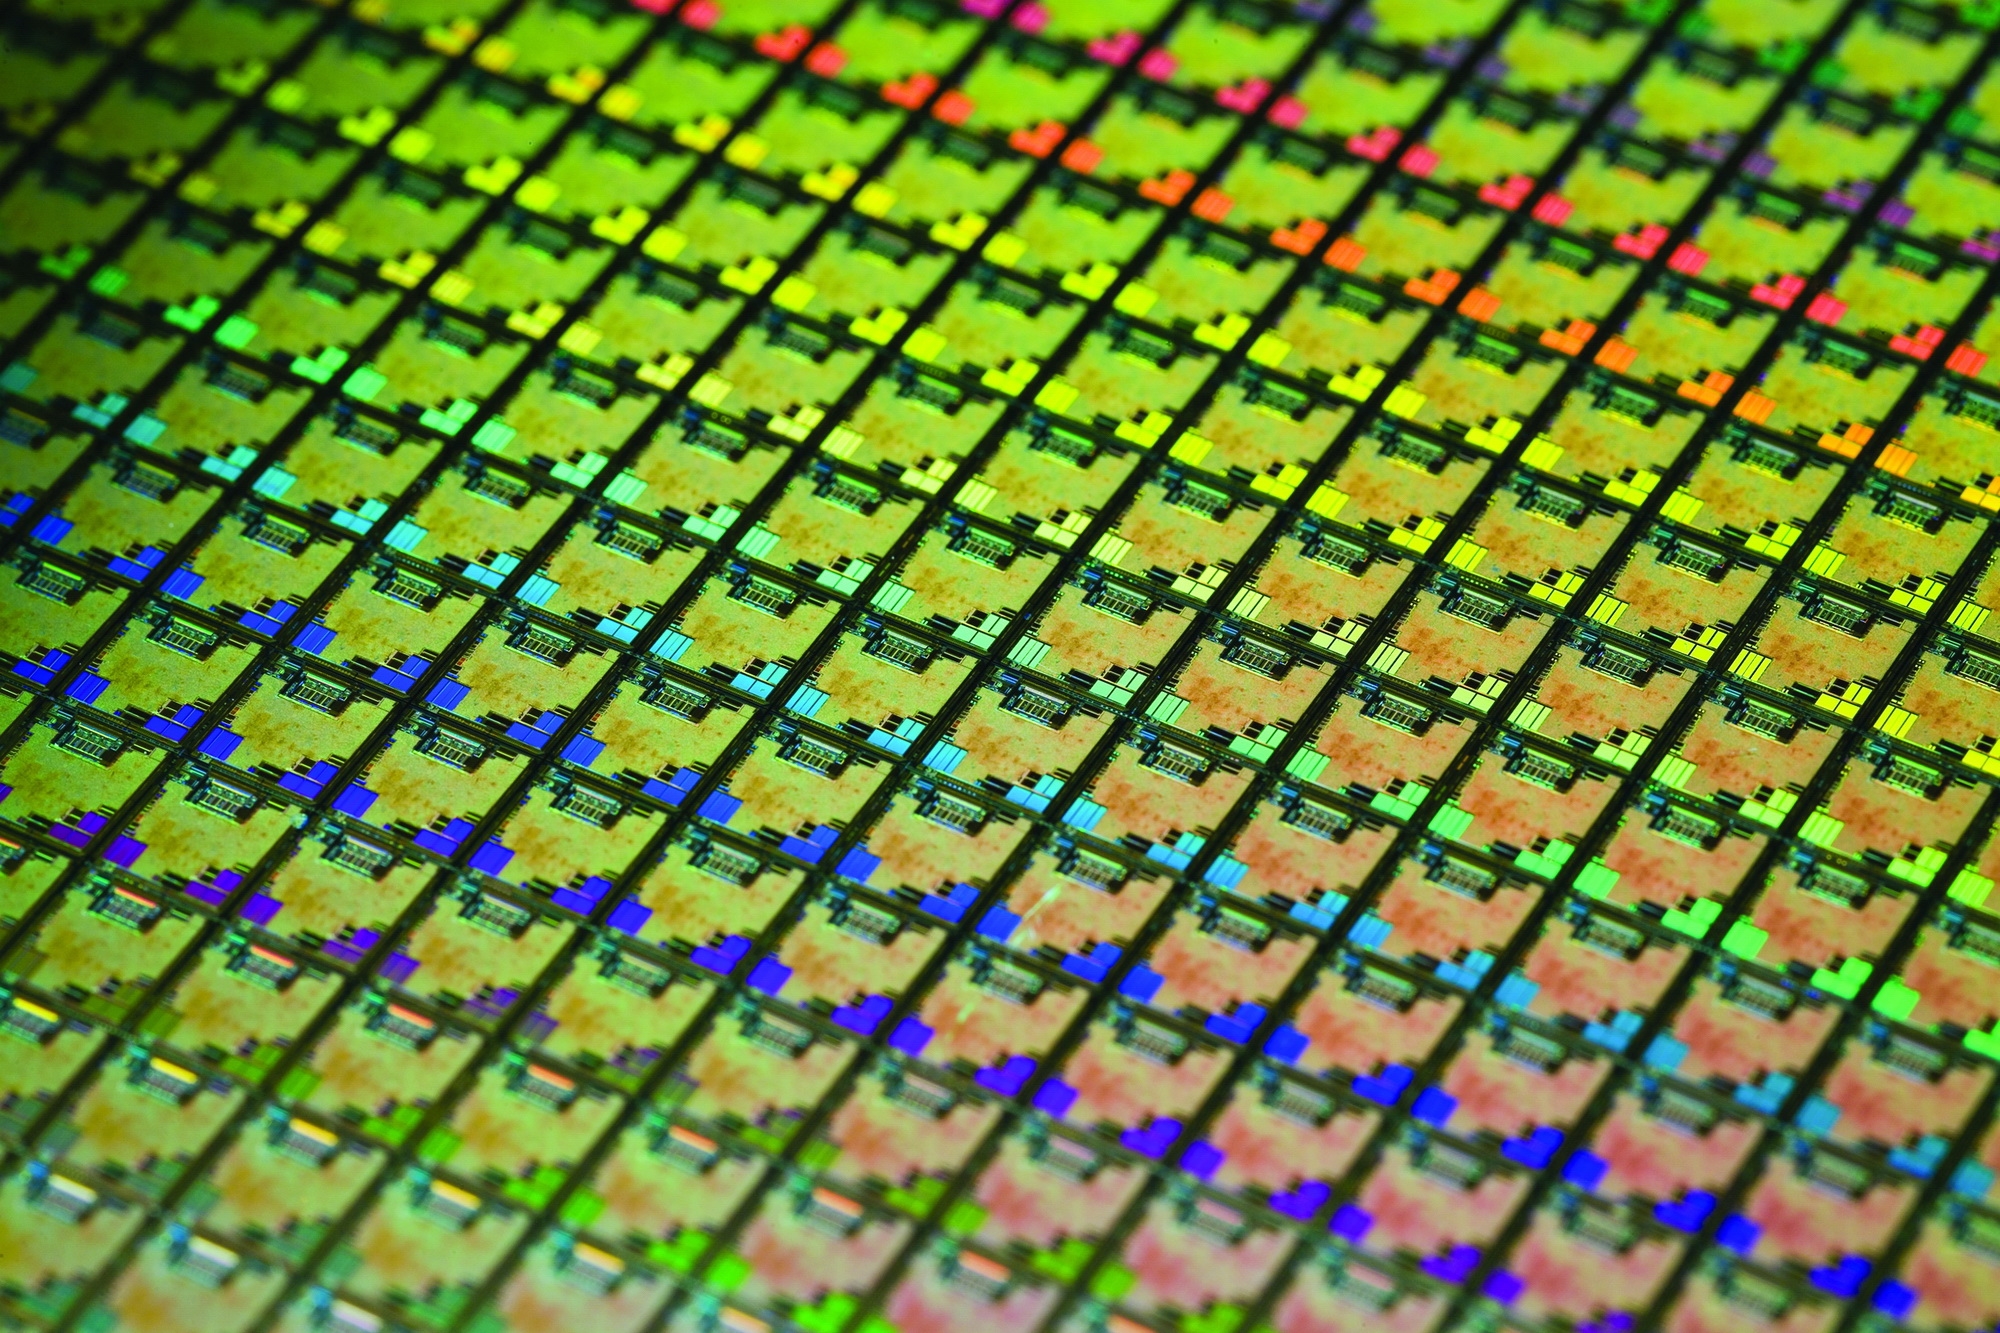 TSMC says 2nm chips will enter production in 2025 | TechSpot